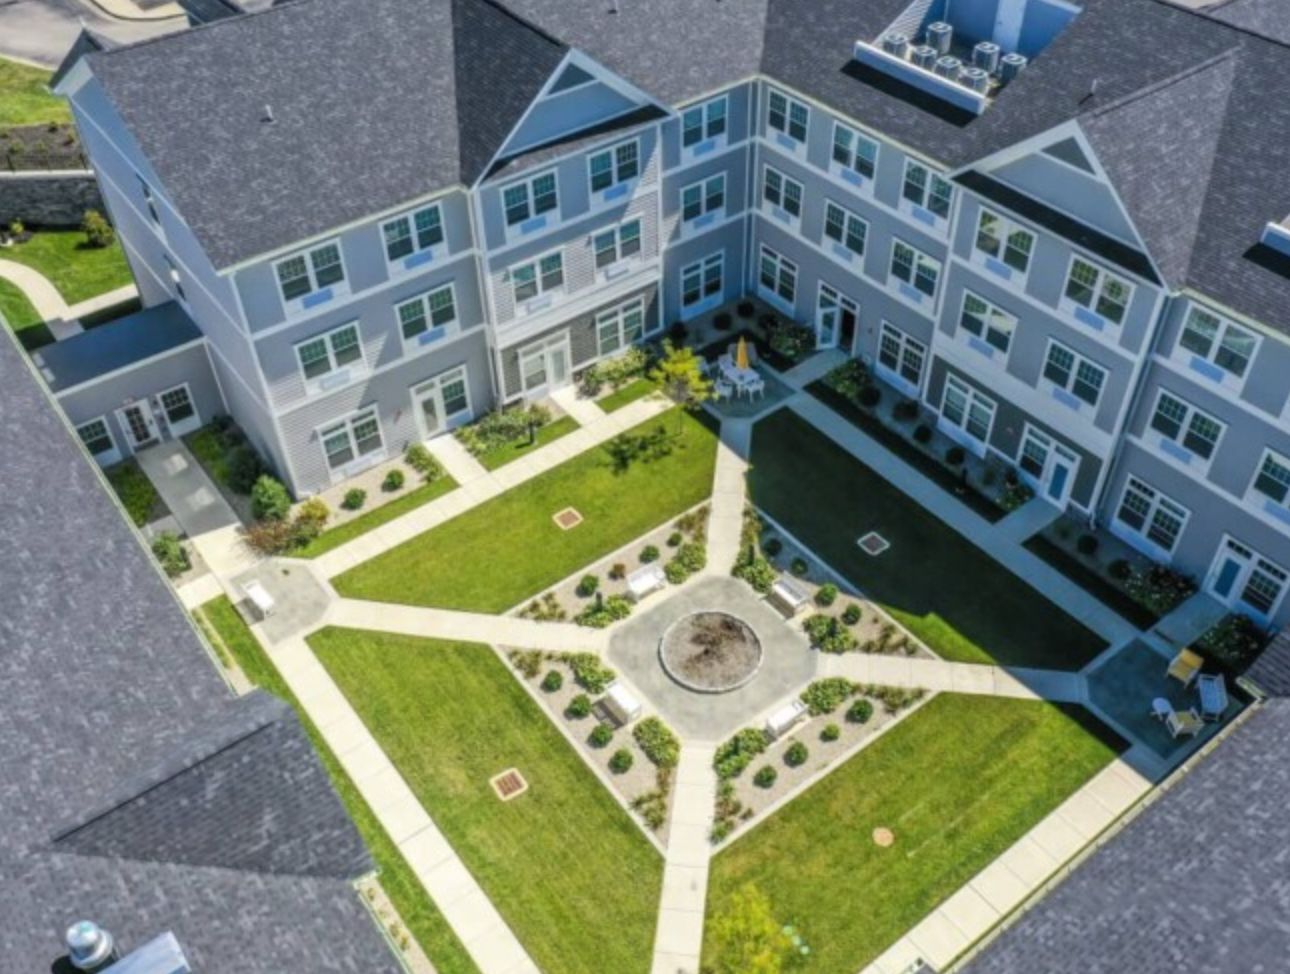 Aerial view of Quincy Place Senior Living community showcasing its architectural design.